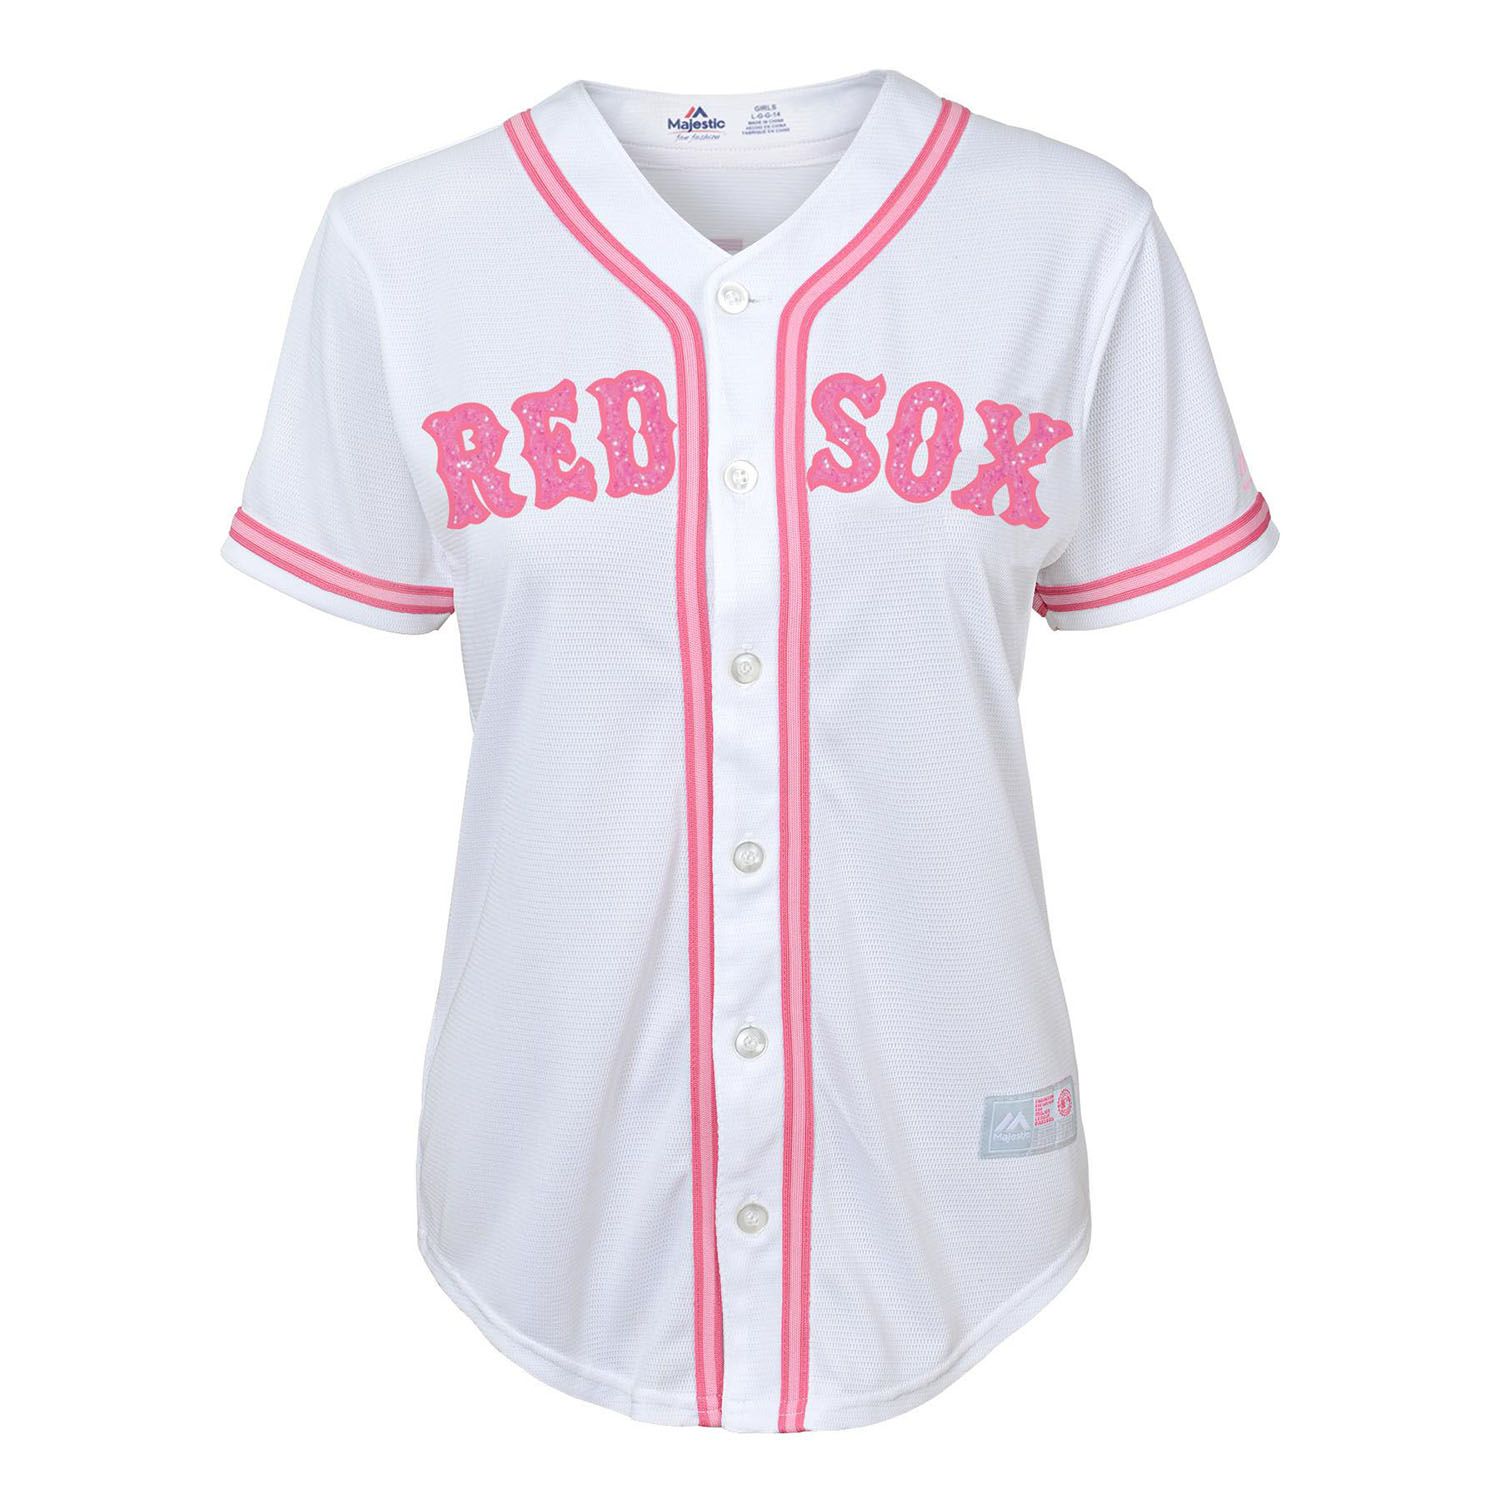 ladies red sox jersey